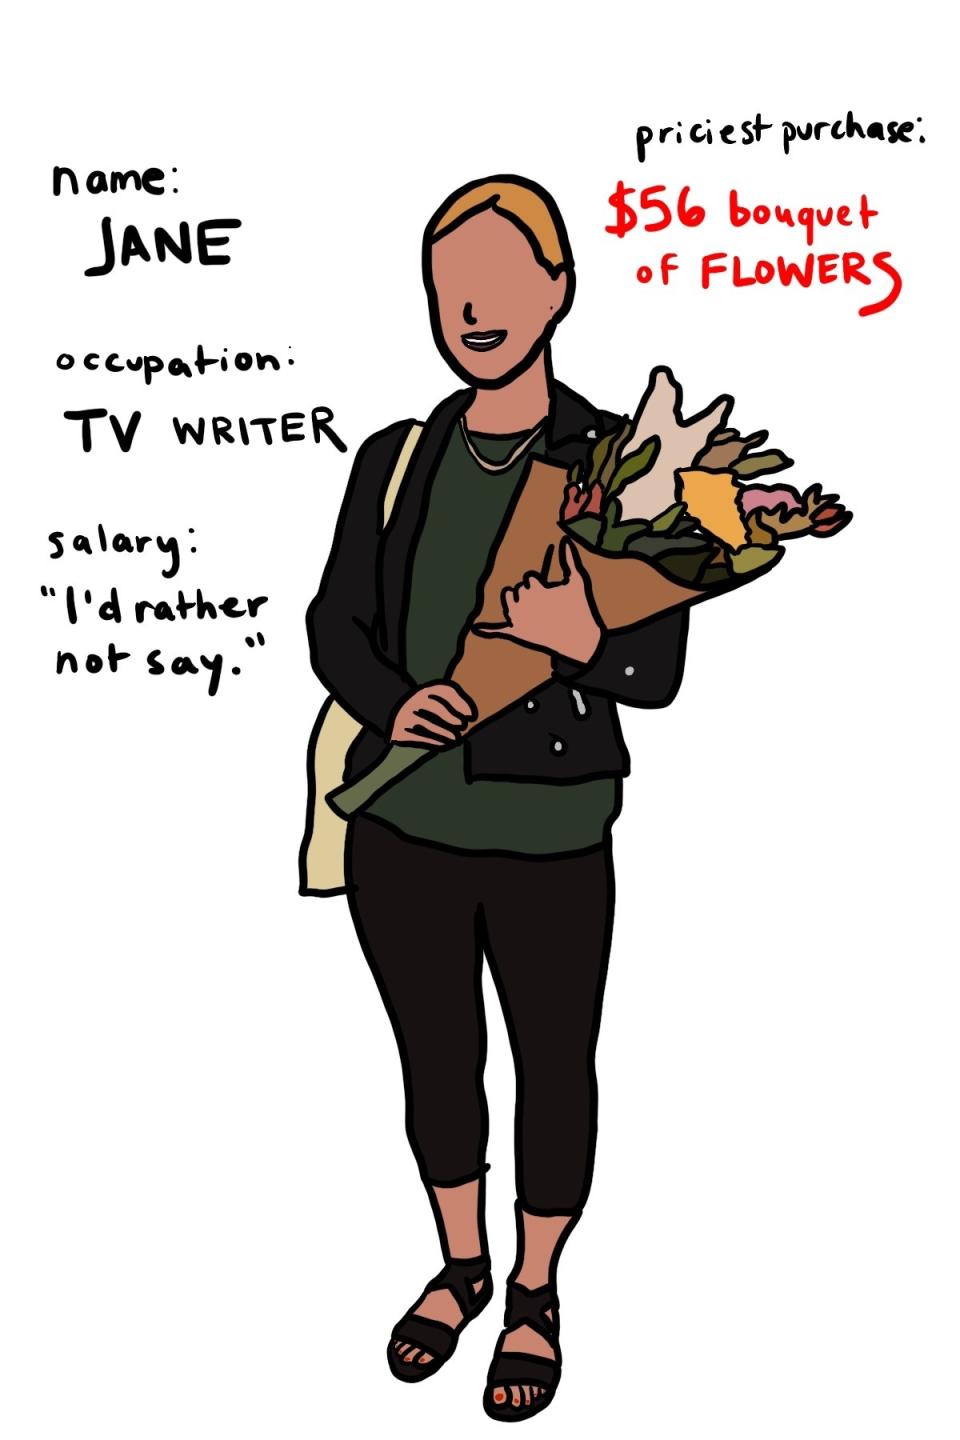 Customer who's a TV writer and won't give salary with $56 flower bouquet